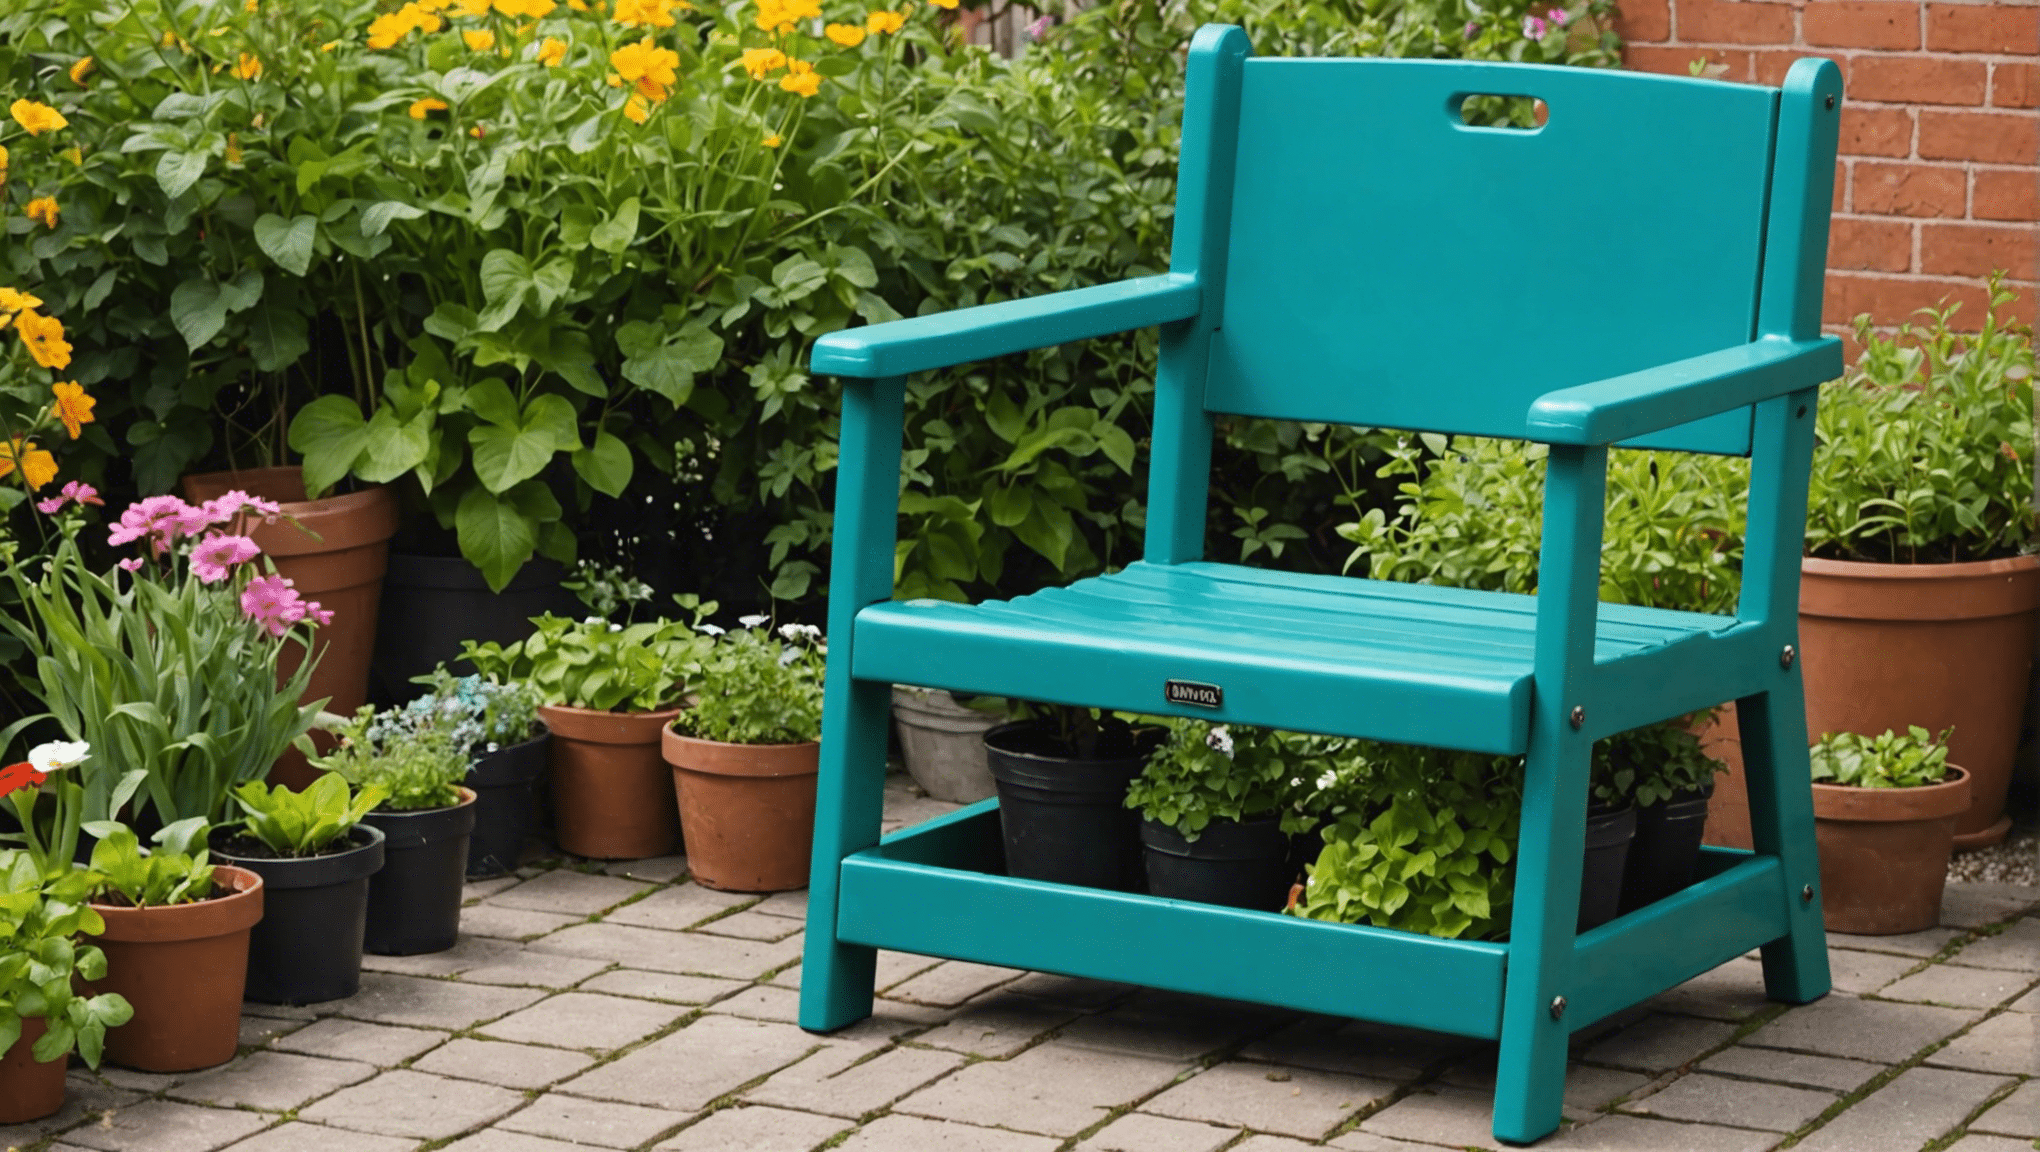 discover the benefits of using a gardening seat for a comfortable and efficient gardening experience. find out how a gardening seat can make your gardening tasks easier and more enjoyable.